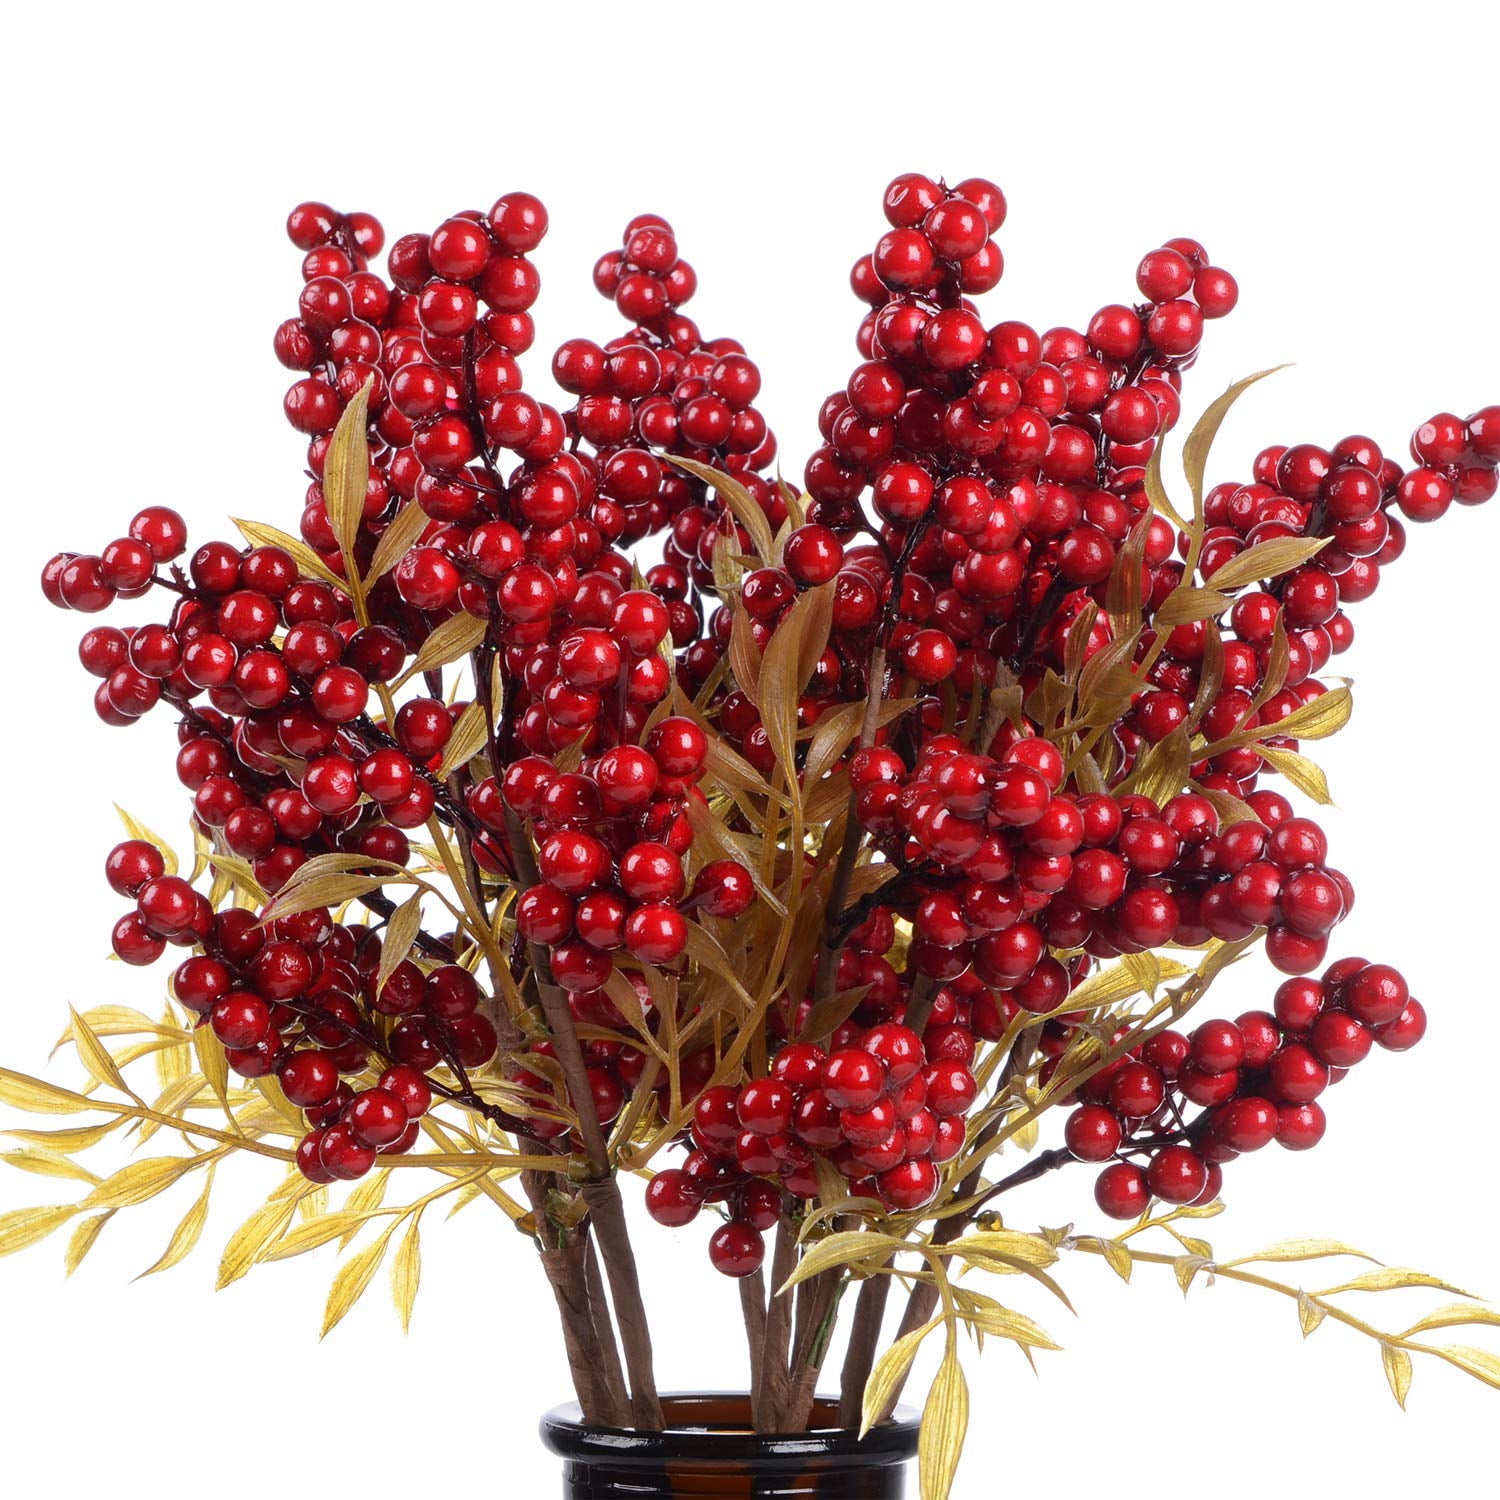 LOKIPA 14 Pack Artificial Red Berry Stems 8 Inch Christmas Red Berry Picks Holly Berries Branches Stem Picks for Christmas Decoration